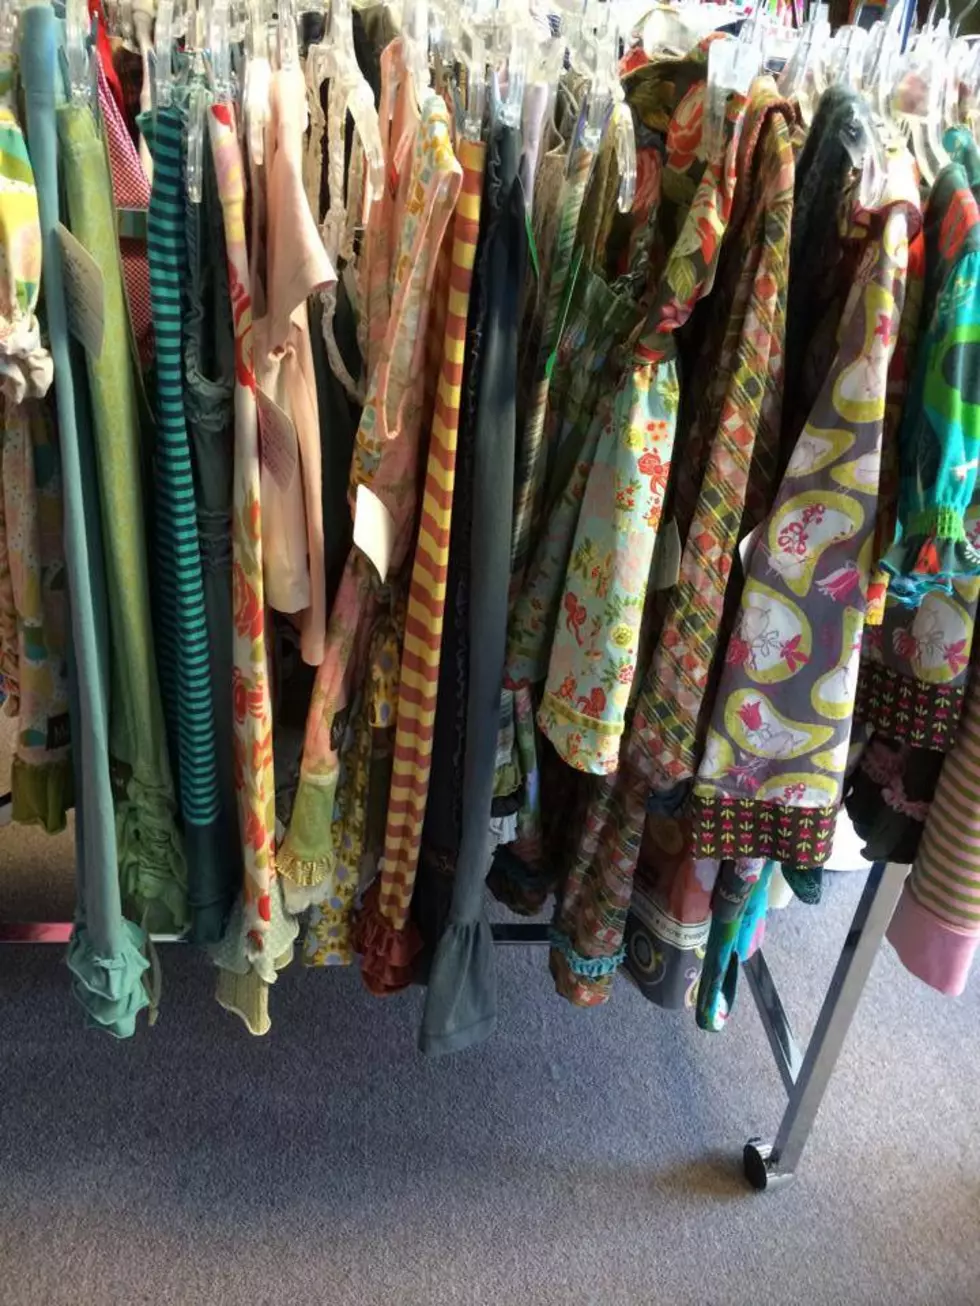 Here Is A List Of The Best Thrift/Consignment Stores In Owensboro (LIST)